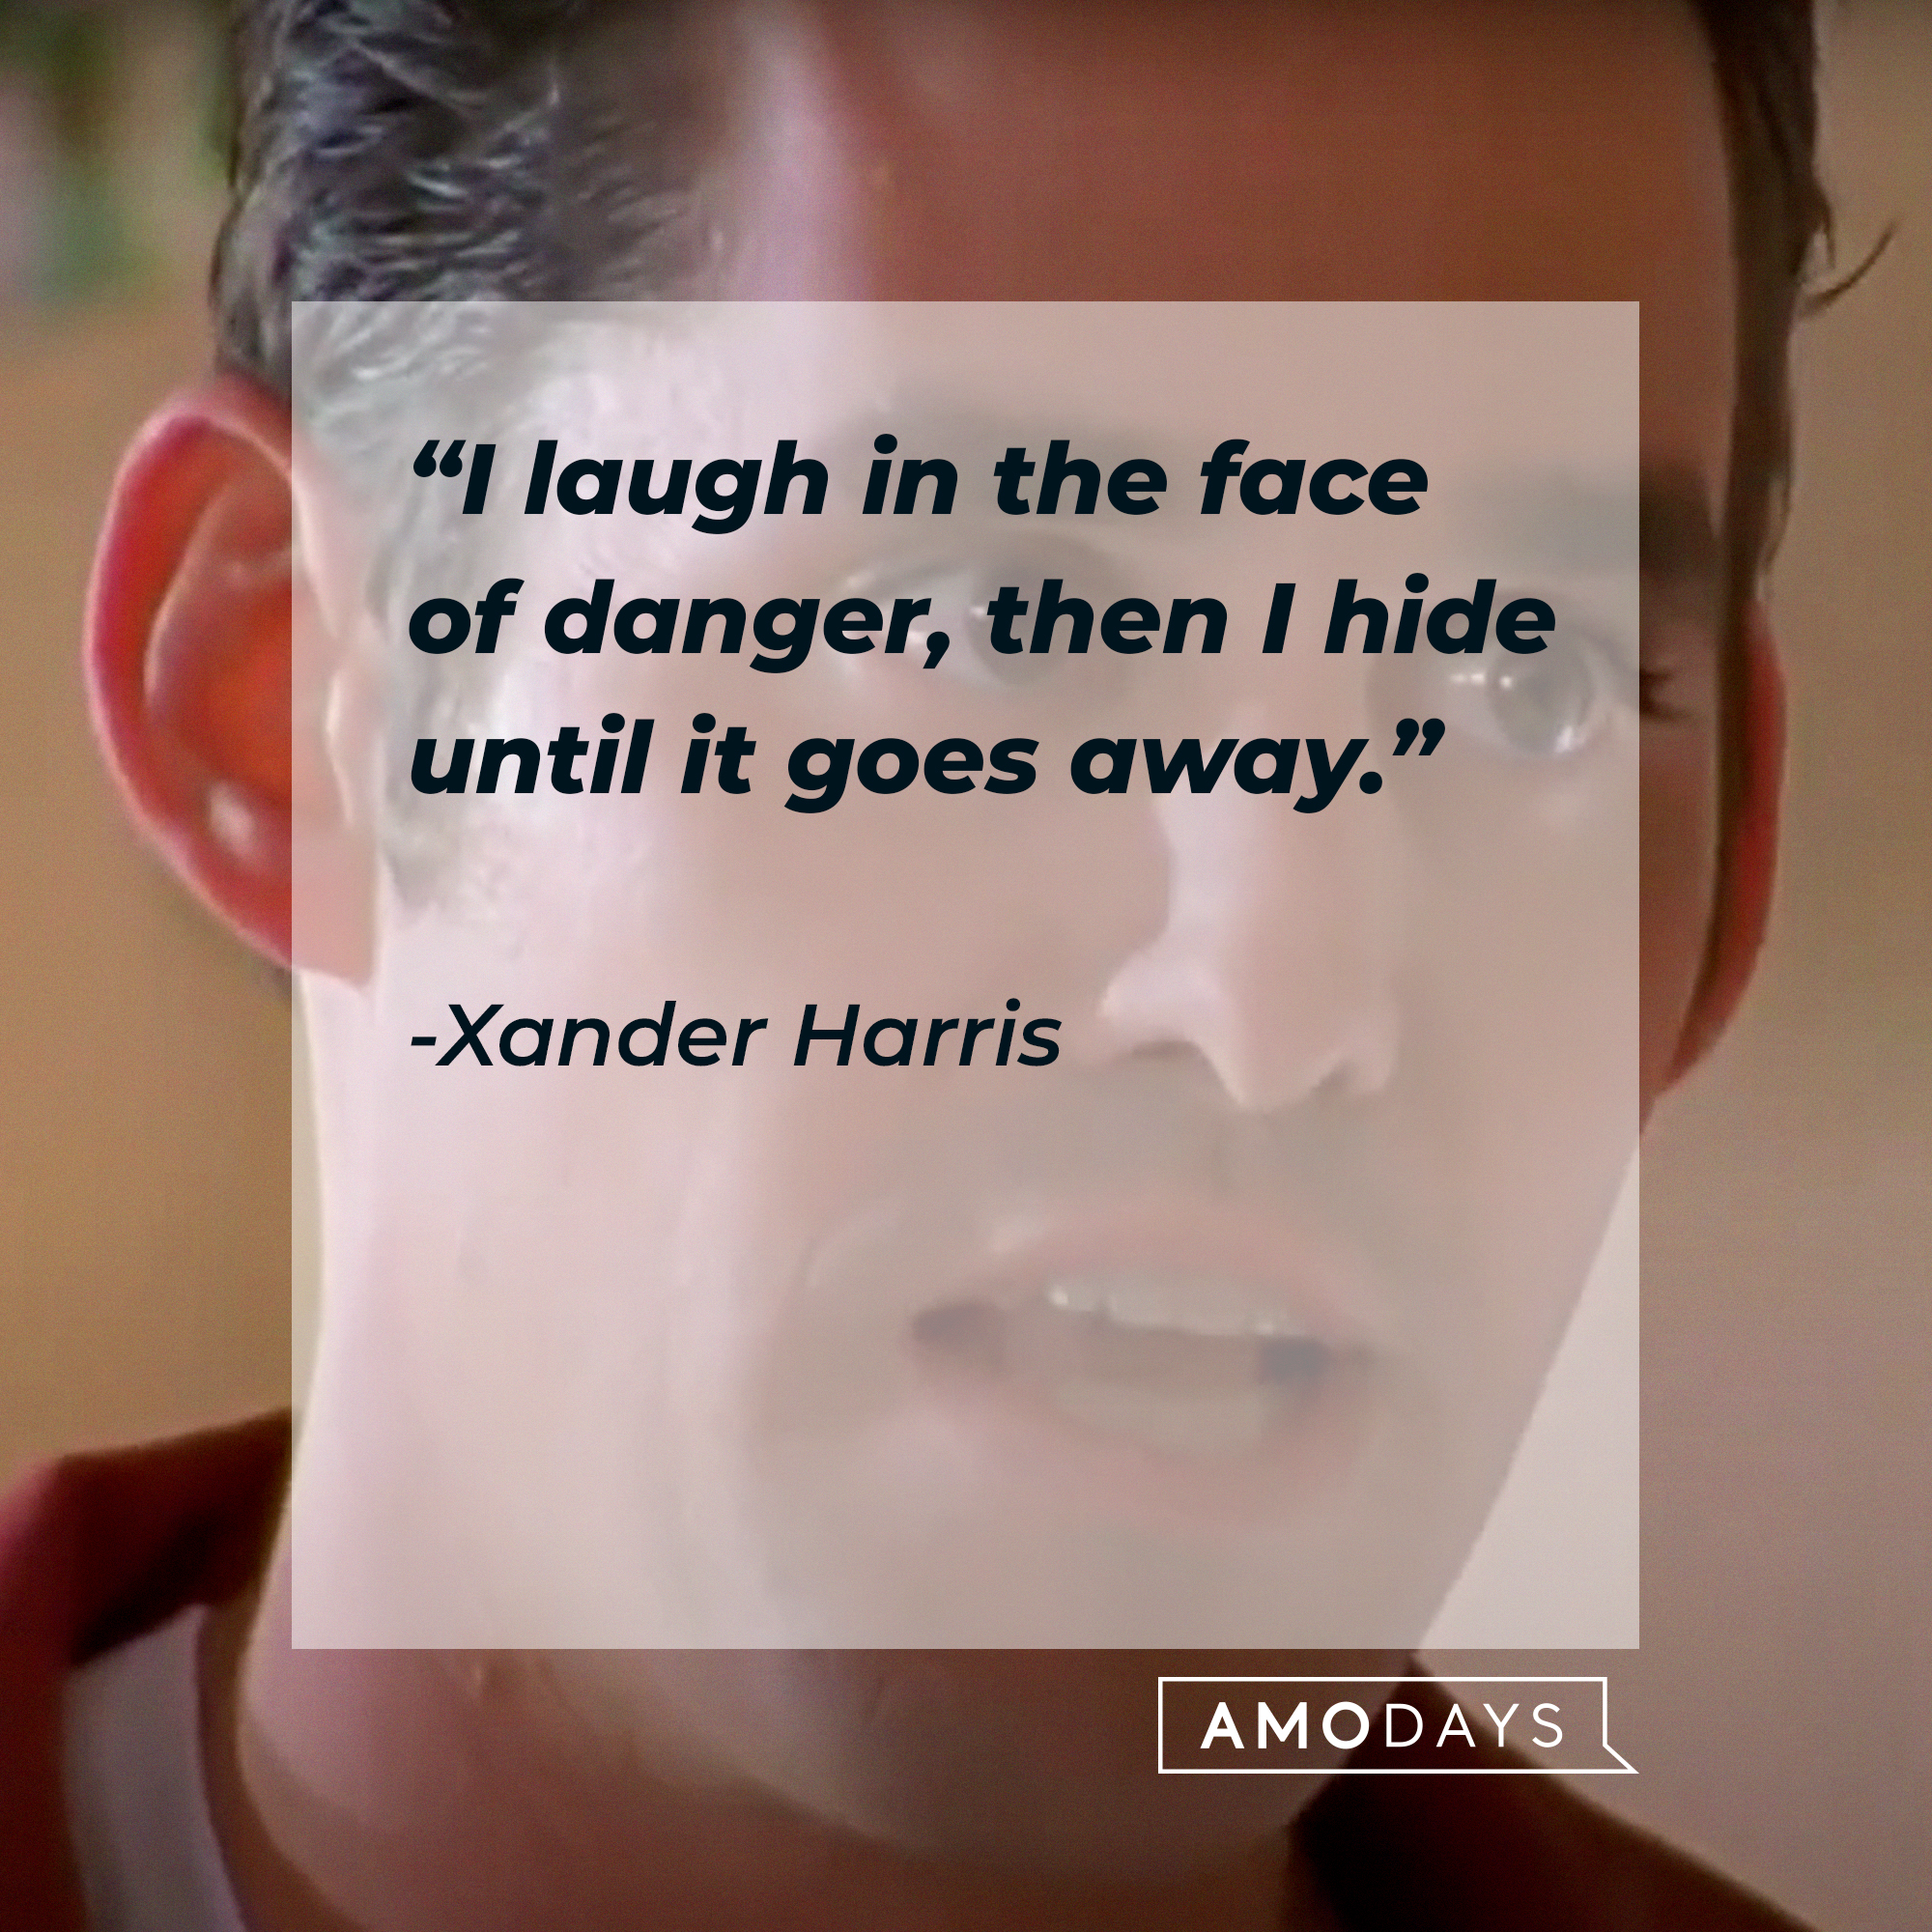 Xander Harris, with his quote: “I laugh in the face of danger, then I hide until it goes away.”  | Source: facebook.com/BuffyTheVampireSlaye